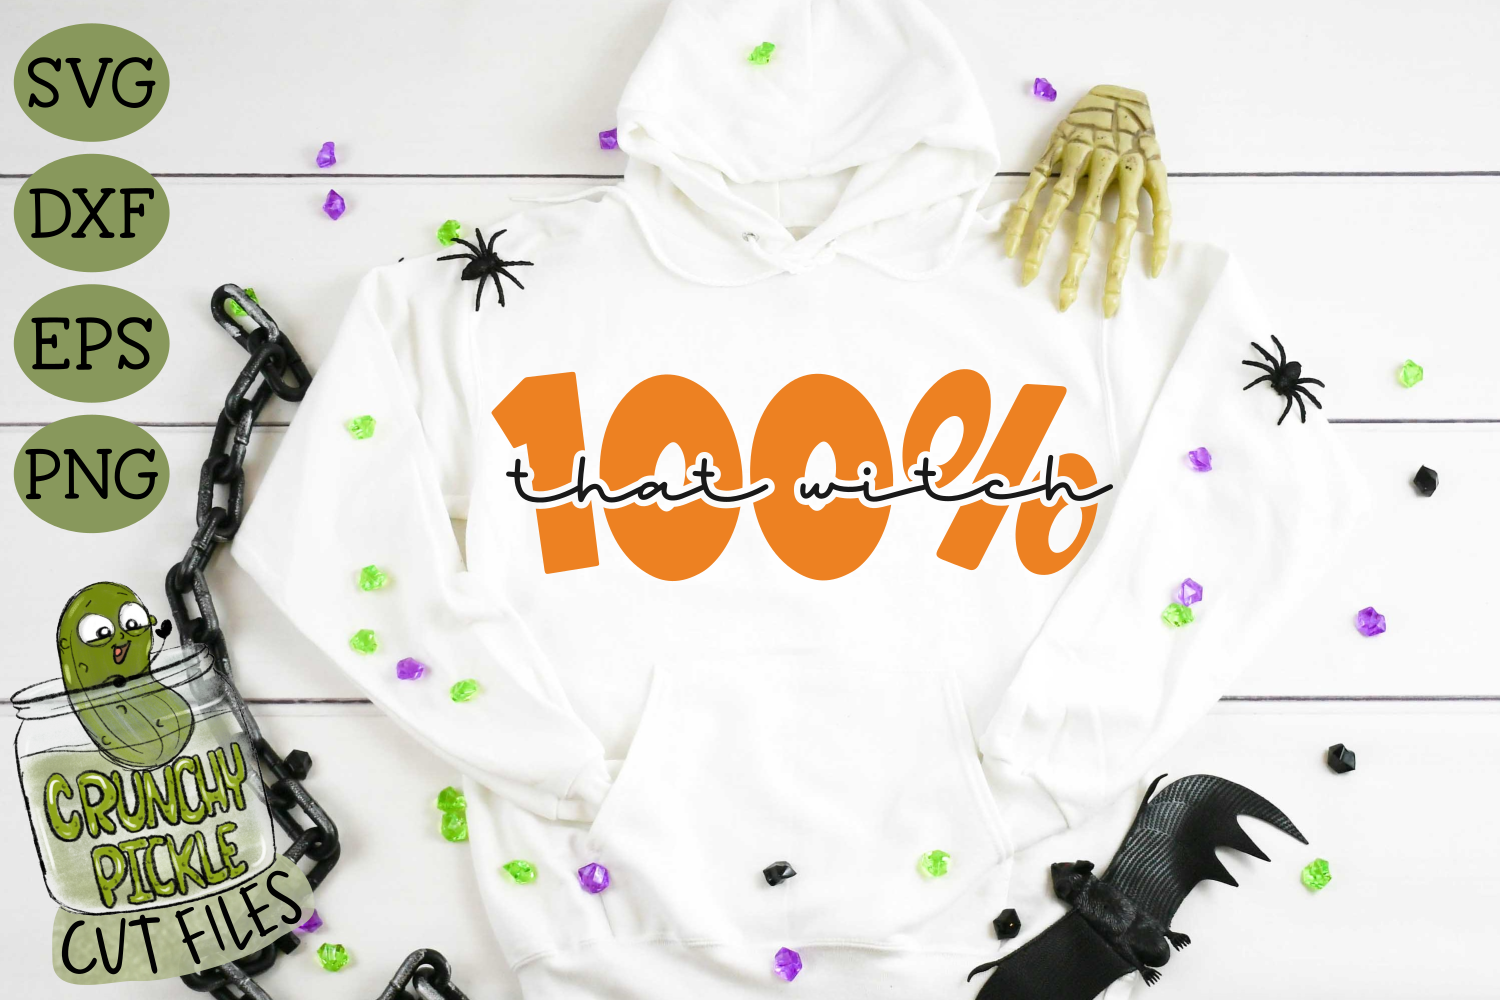 100 That Witch Halloween Svg Cut File By Crunchy Pickle Thehungryjpeg Com